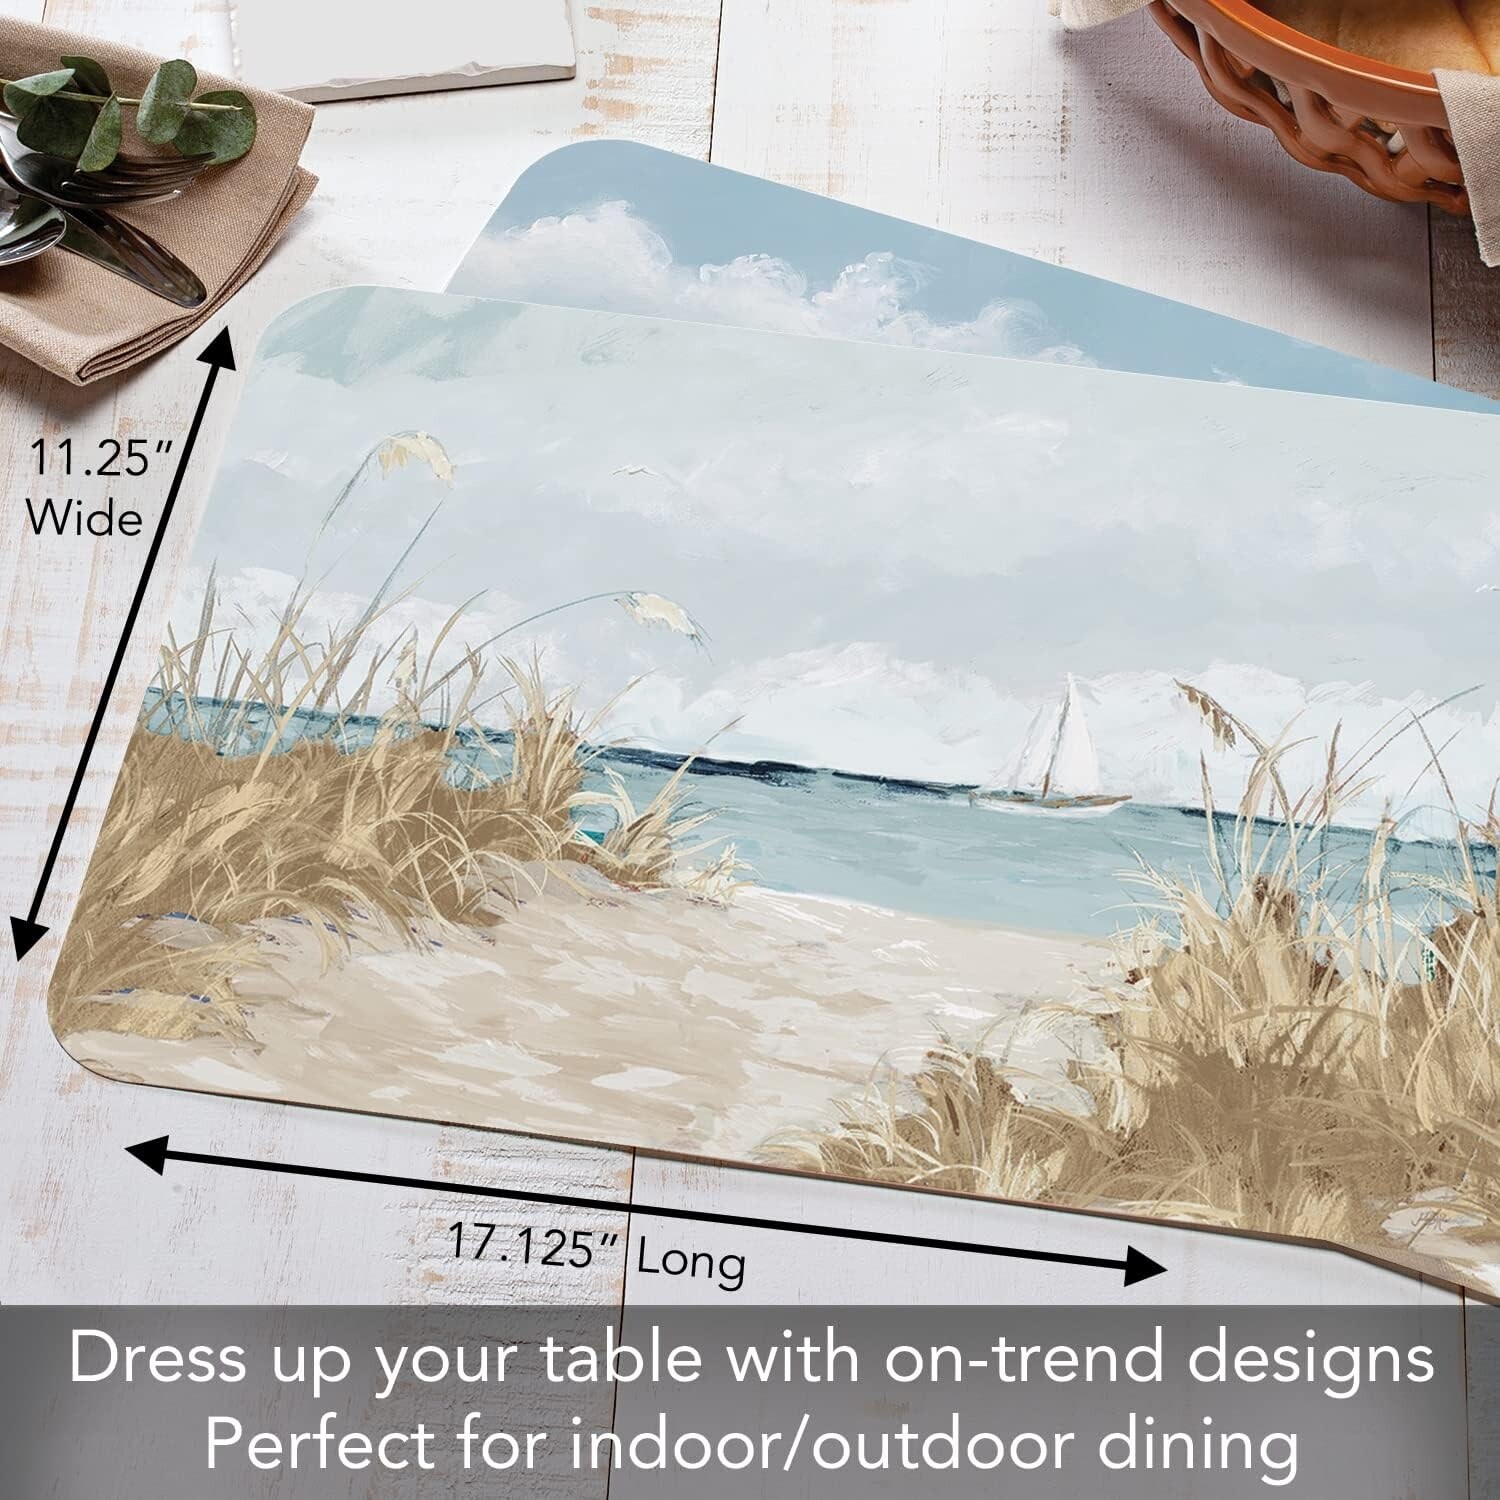 Wipe-Clean Reversible Decofoam Placemats, Coastal Scenery, Set of 4, Made in The USA